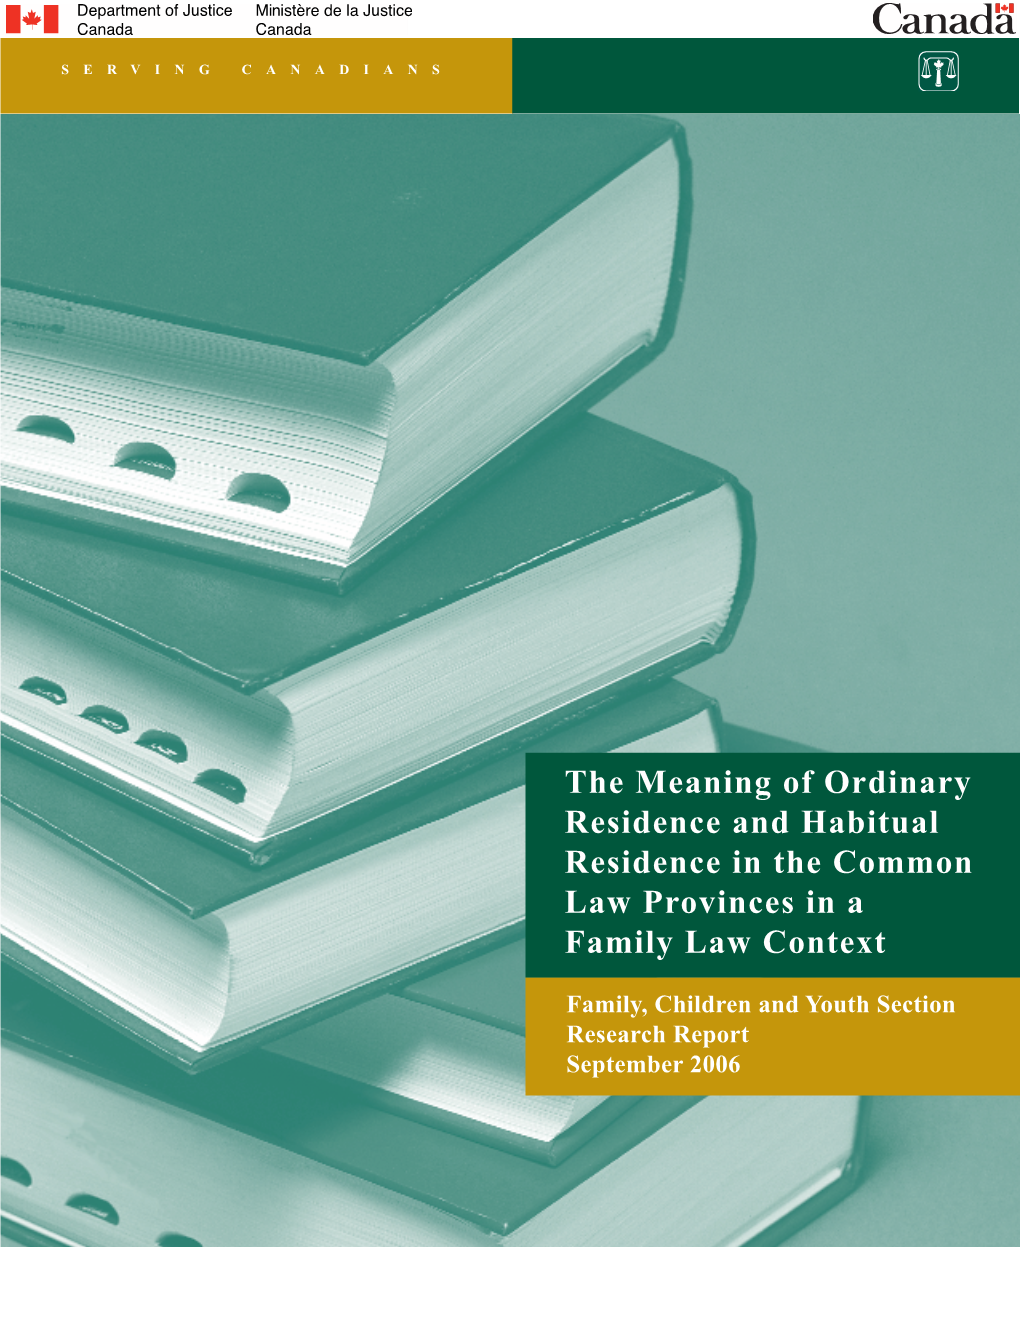 The Meaning of Ordinary Residence and Habitual Residence in the Common Law Provinces in a Family Law Context